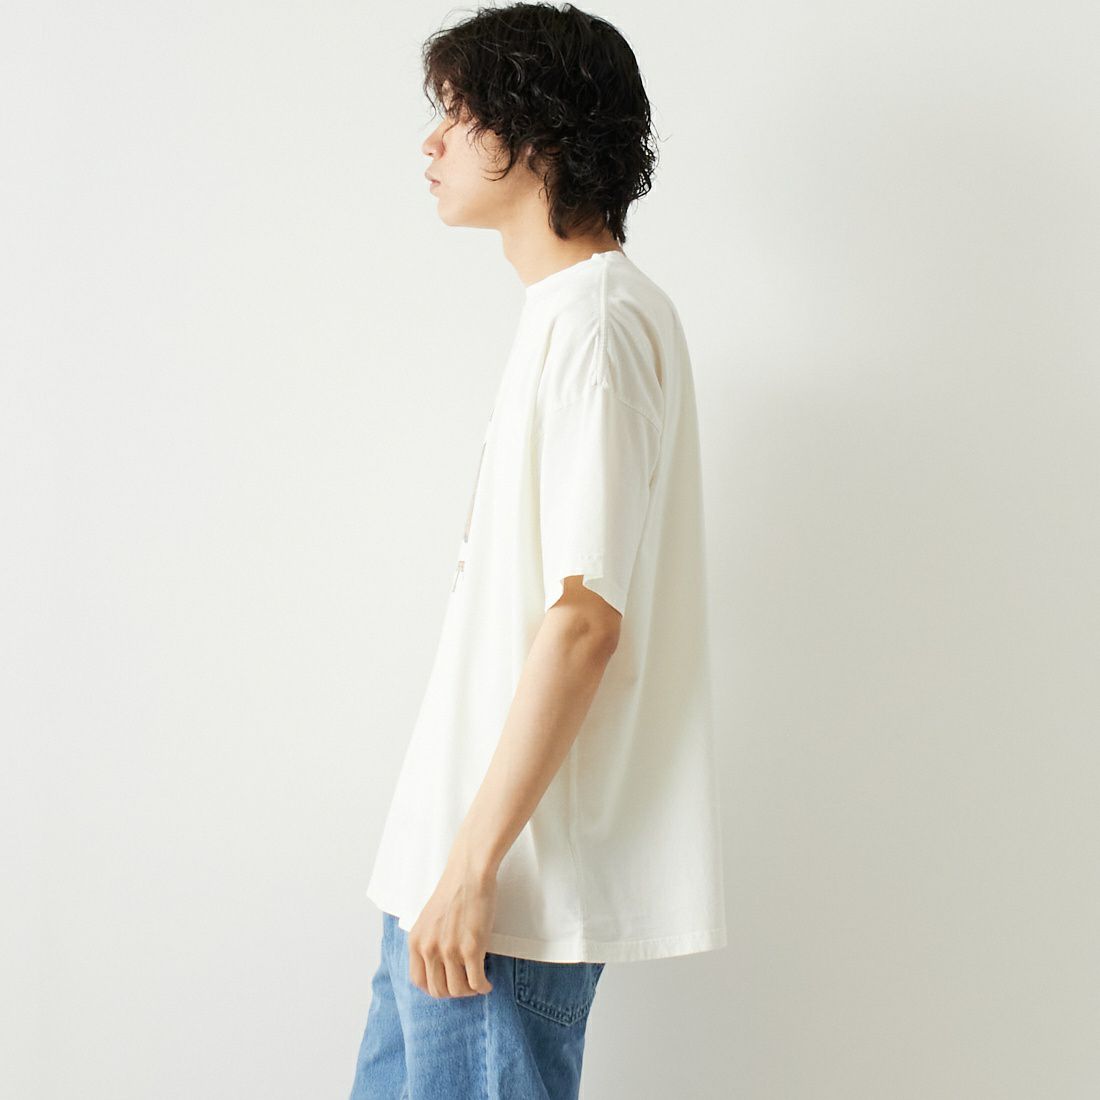 REMI RELIEF [レミレリーフ] 別注 20天竺プリントTシャツ MALION [RN24329254-JF] OFF &&モデル身長：182cm 着用サイズ：M&&